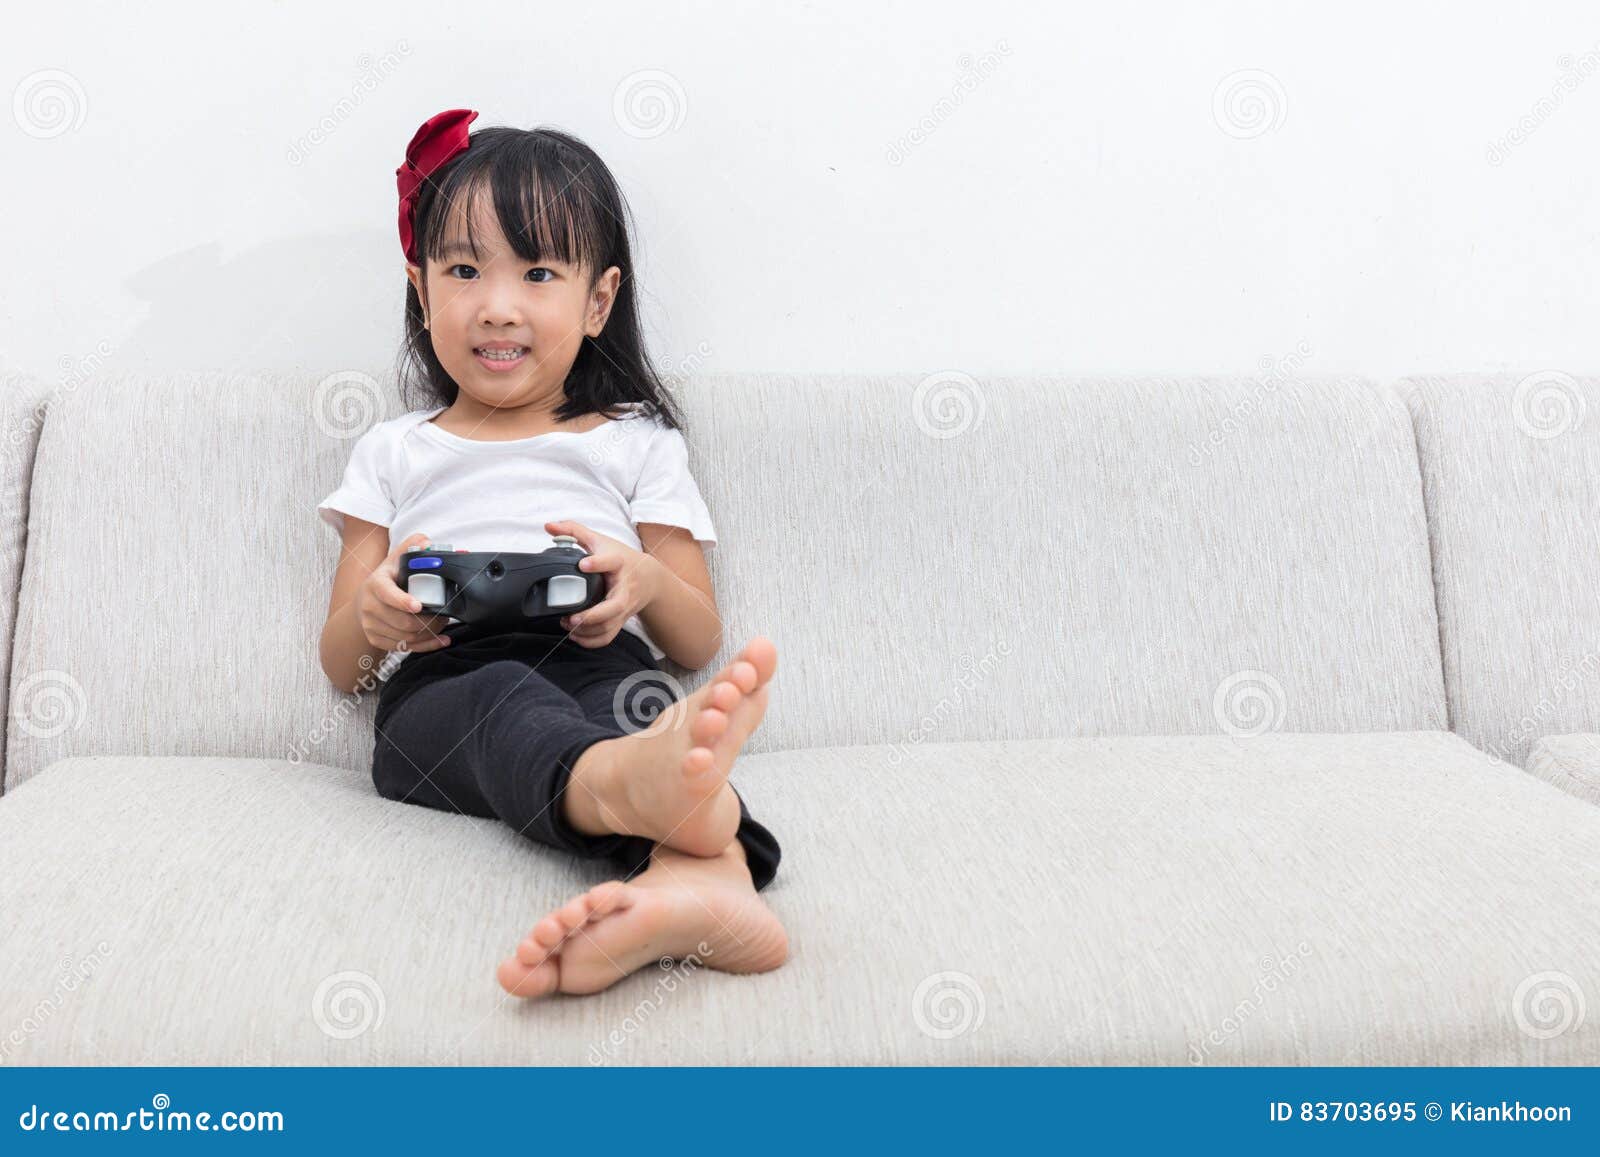 Girls Home Alone Playing Games